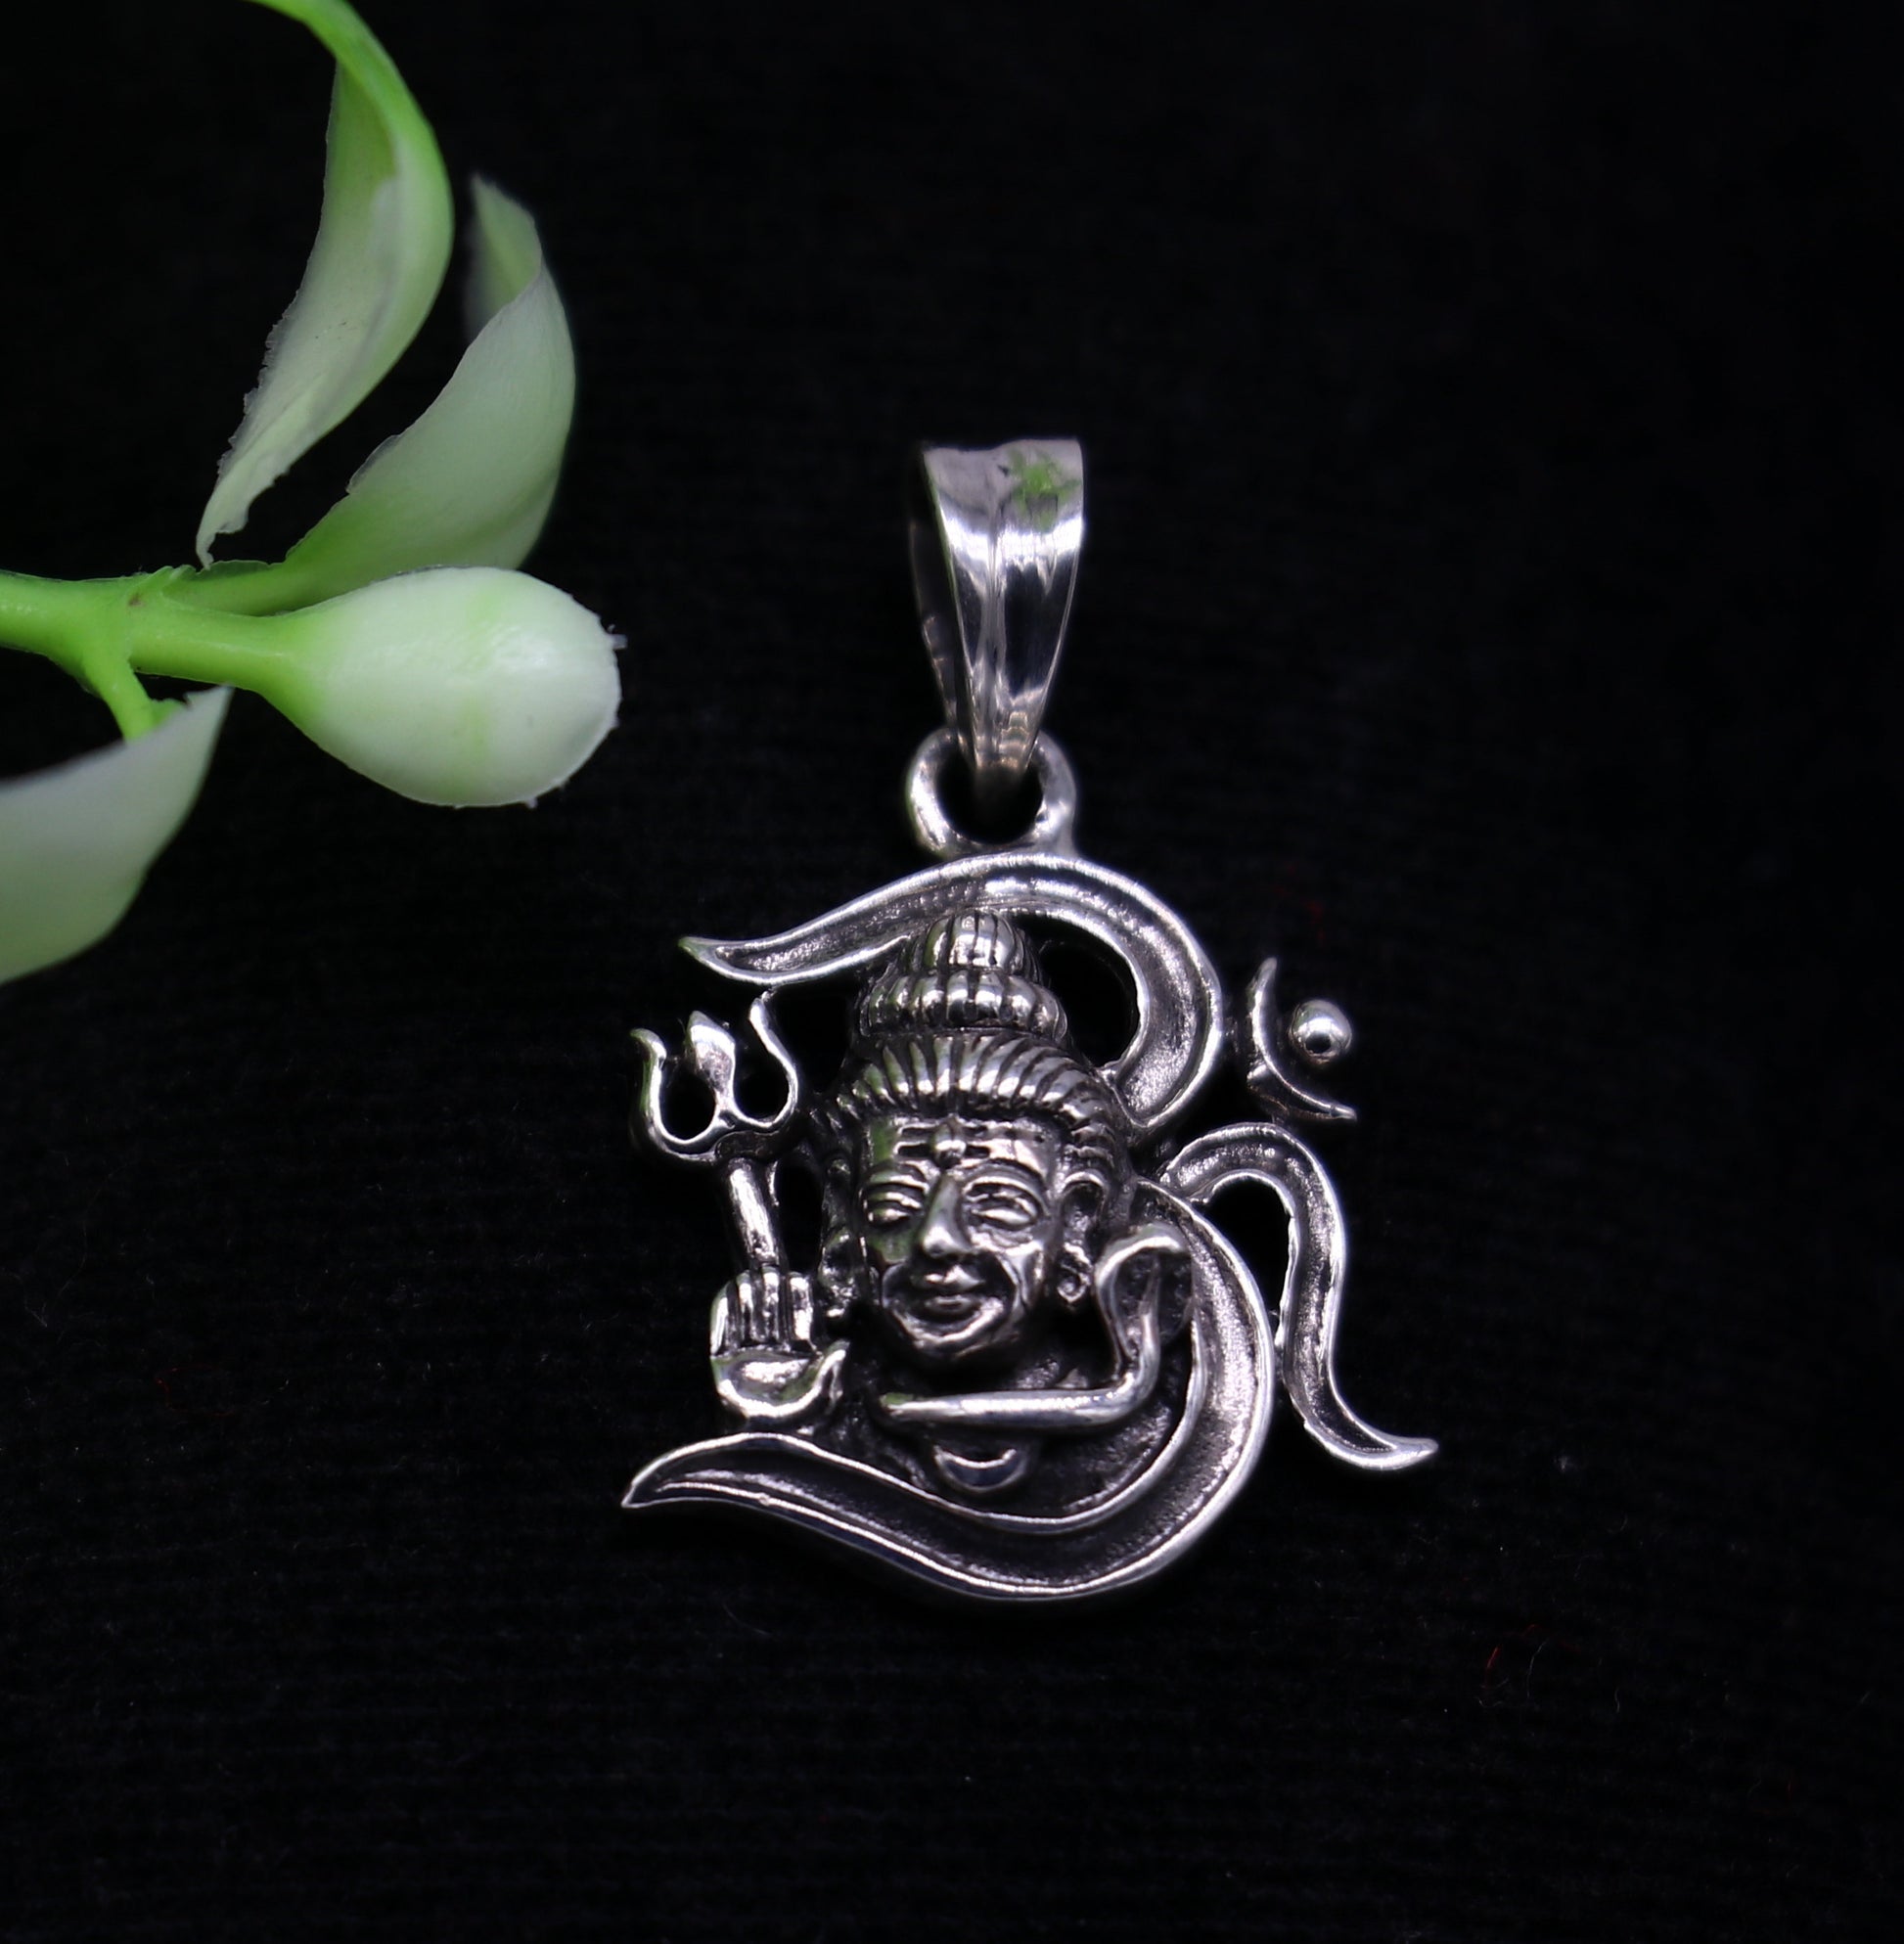 925 sterling silver customize vintage antique style Idol Lord Shiva Pendant, amazing design stunning pendant unisex gifting jewelry ssp551 - TRIBAL ORNAMENTS